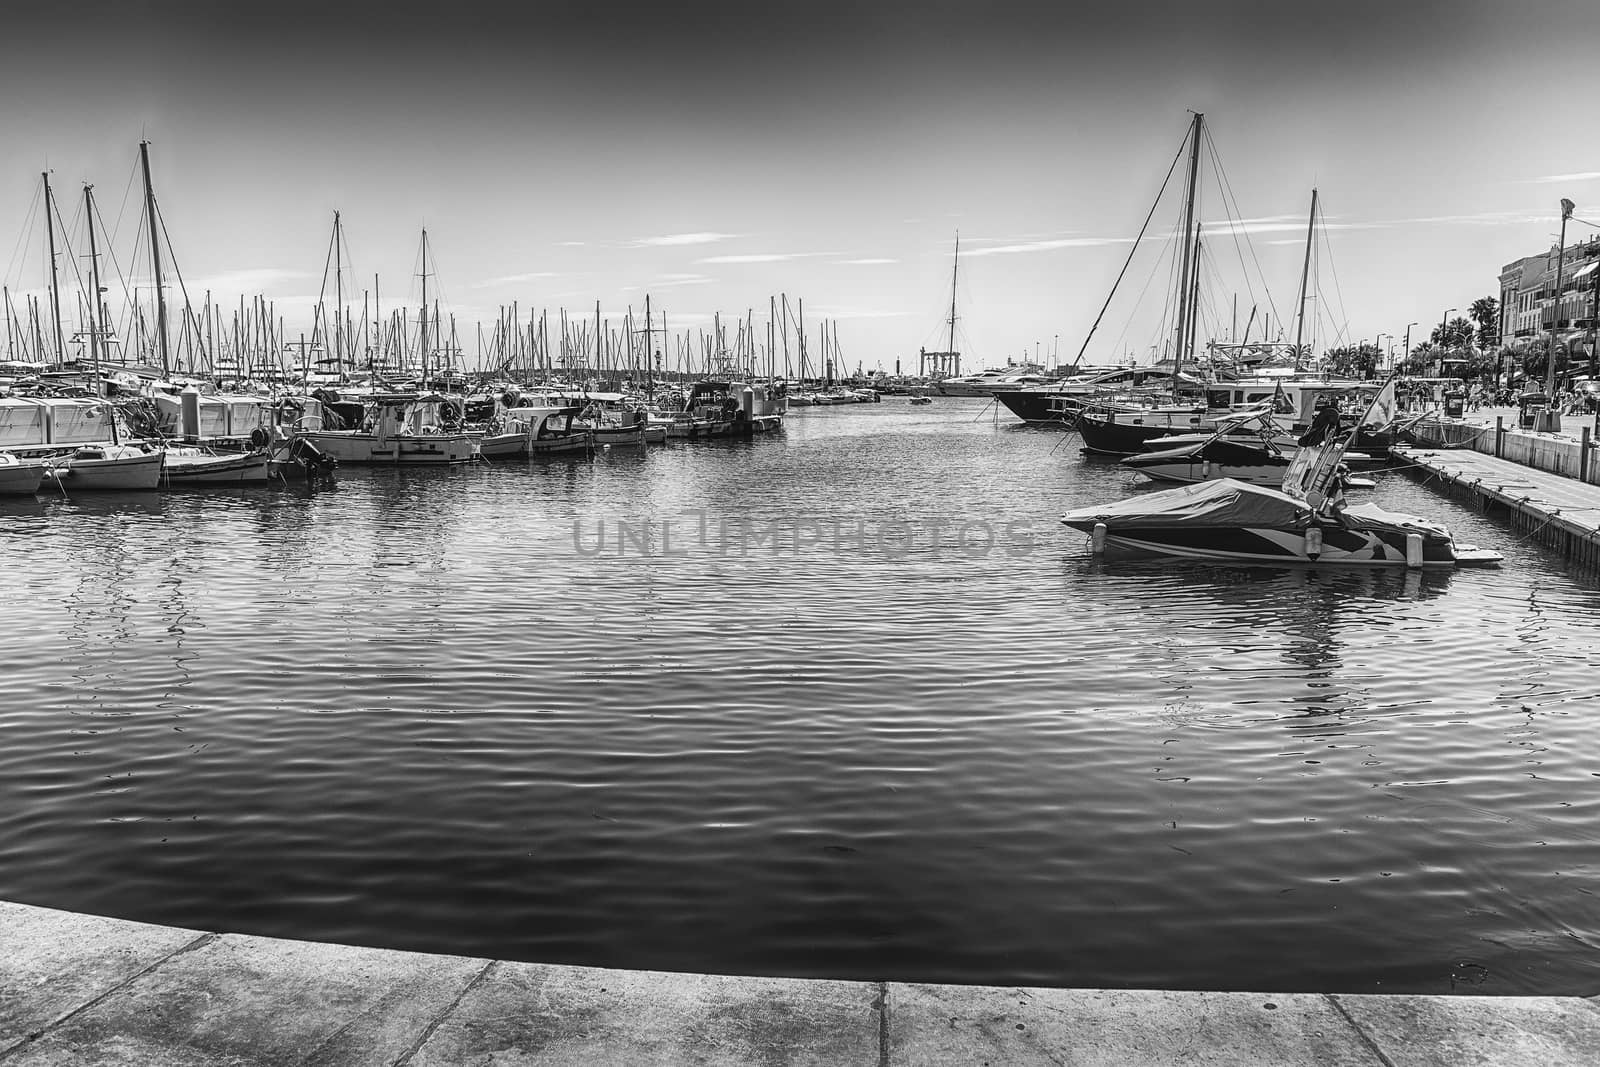 View over the Old Harbor, Cannes, Cote d'Azur, France by marcorubino